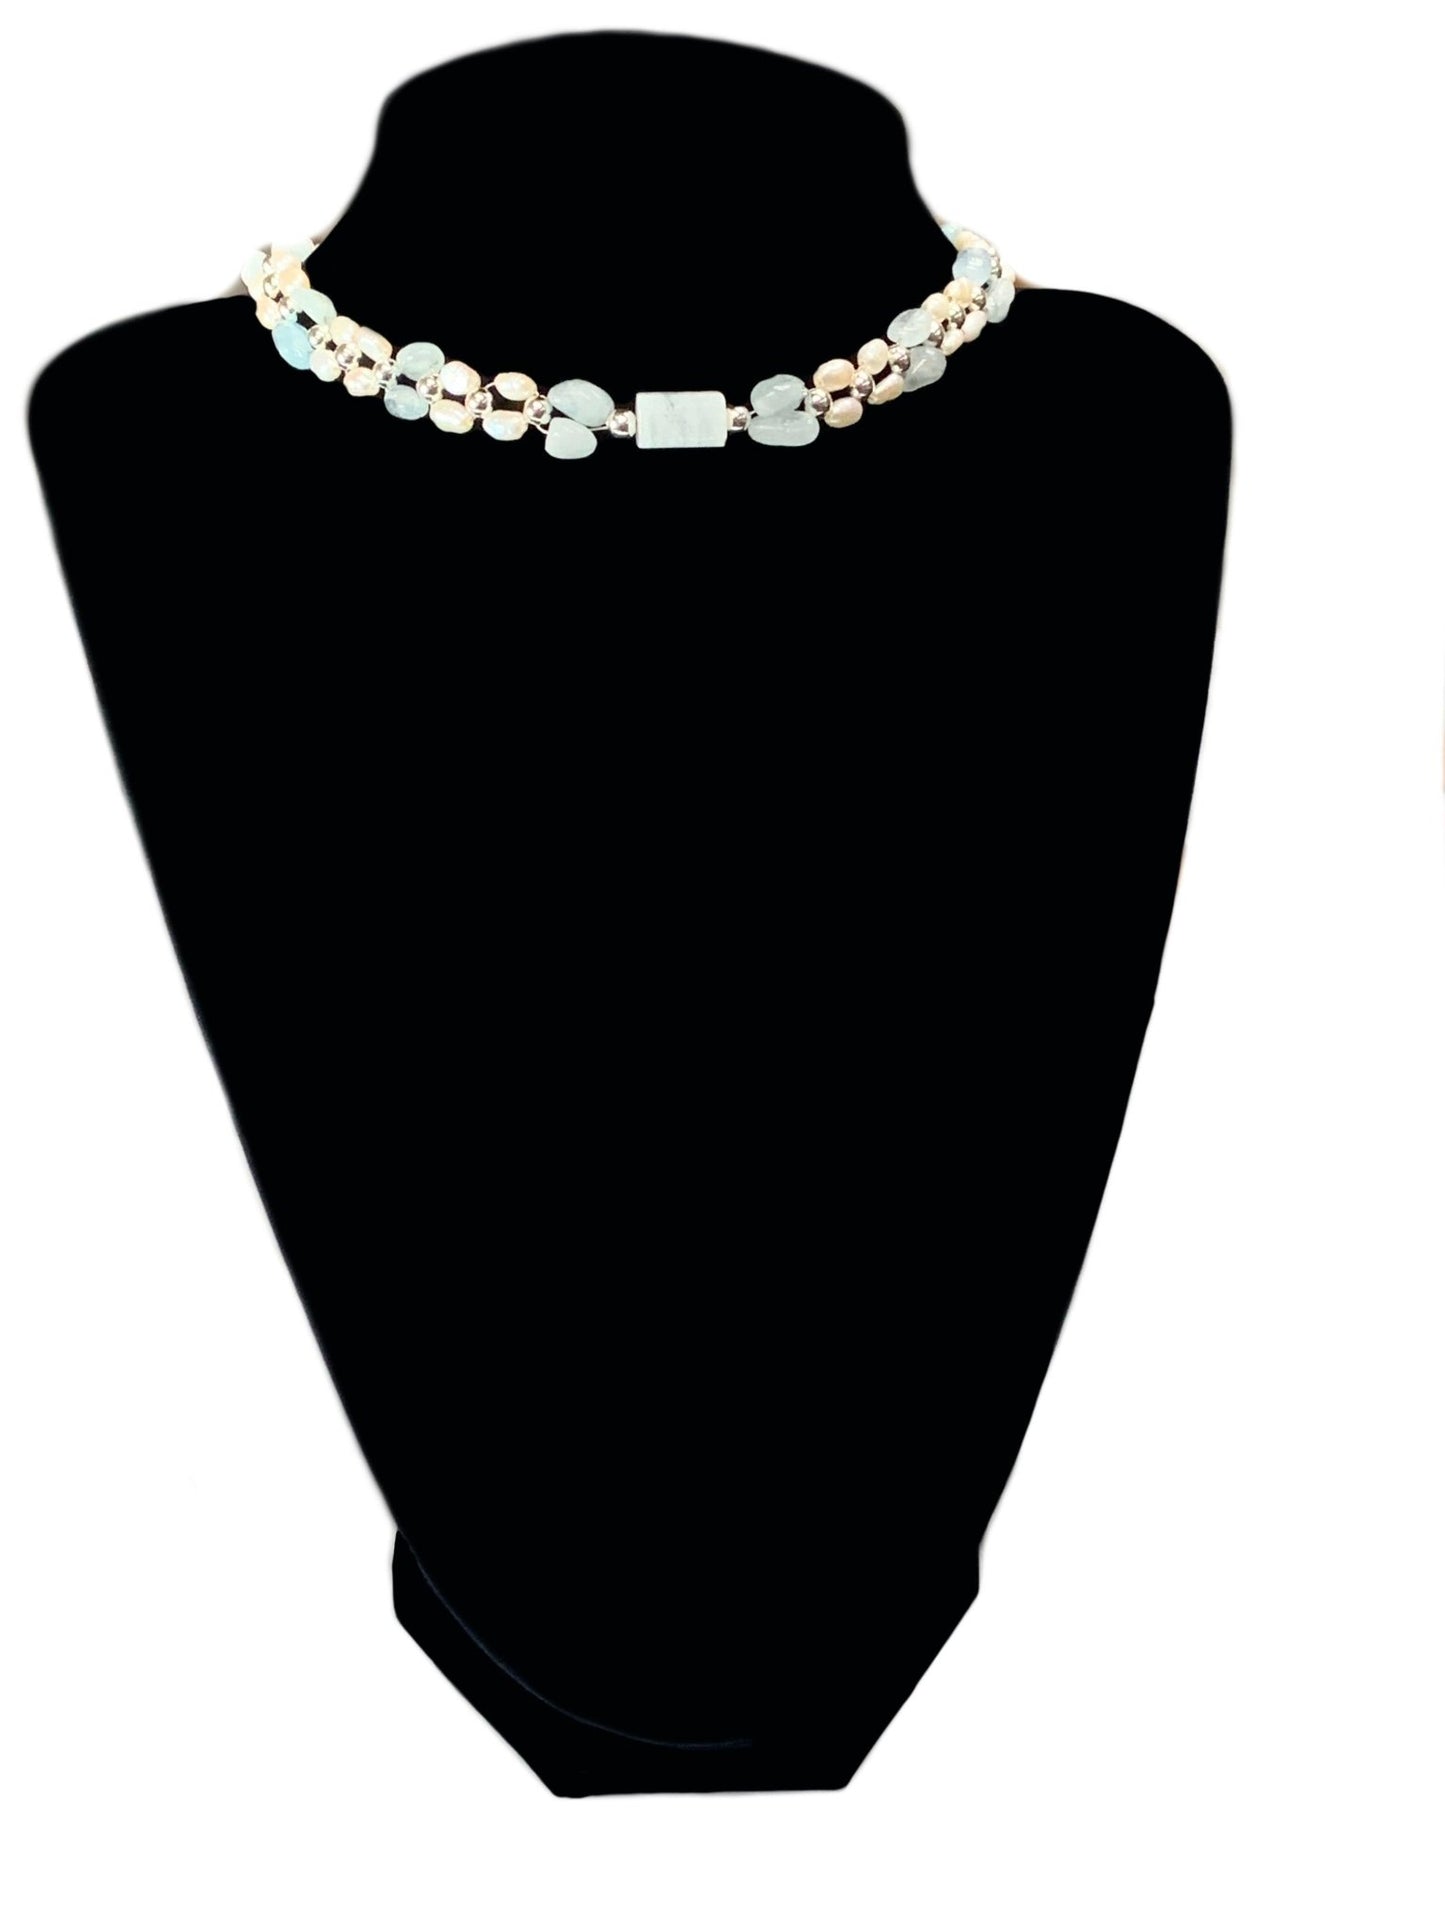 🔴SOLD🔴Marcelline Handmade Authentic Aquamarine and Cultured Rice Pearl Necklace/ Choker - Born Mystics